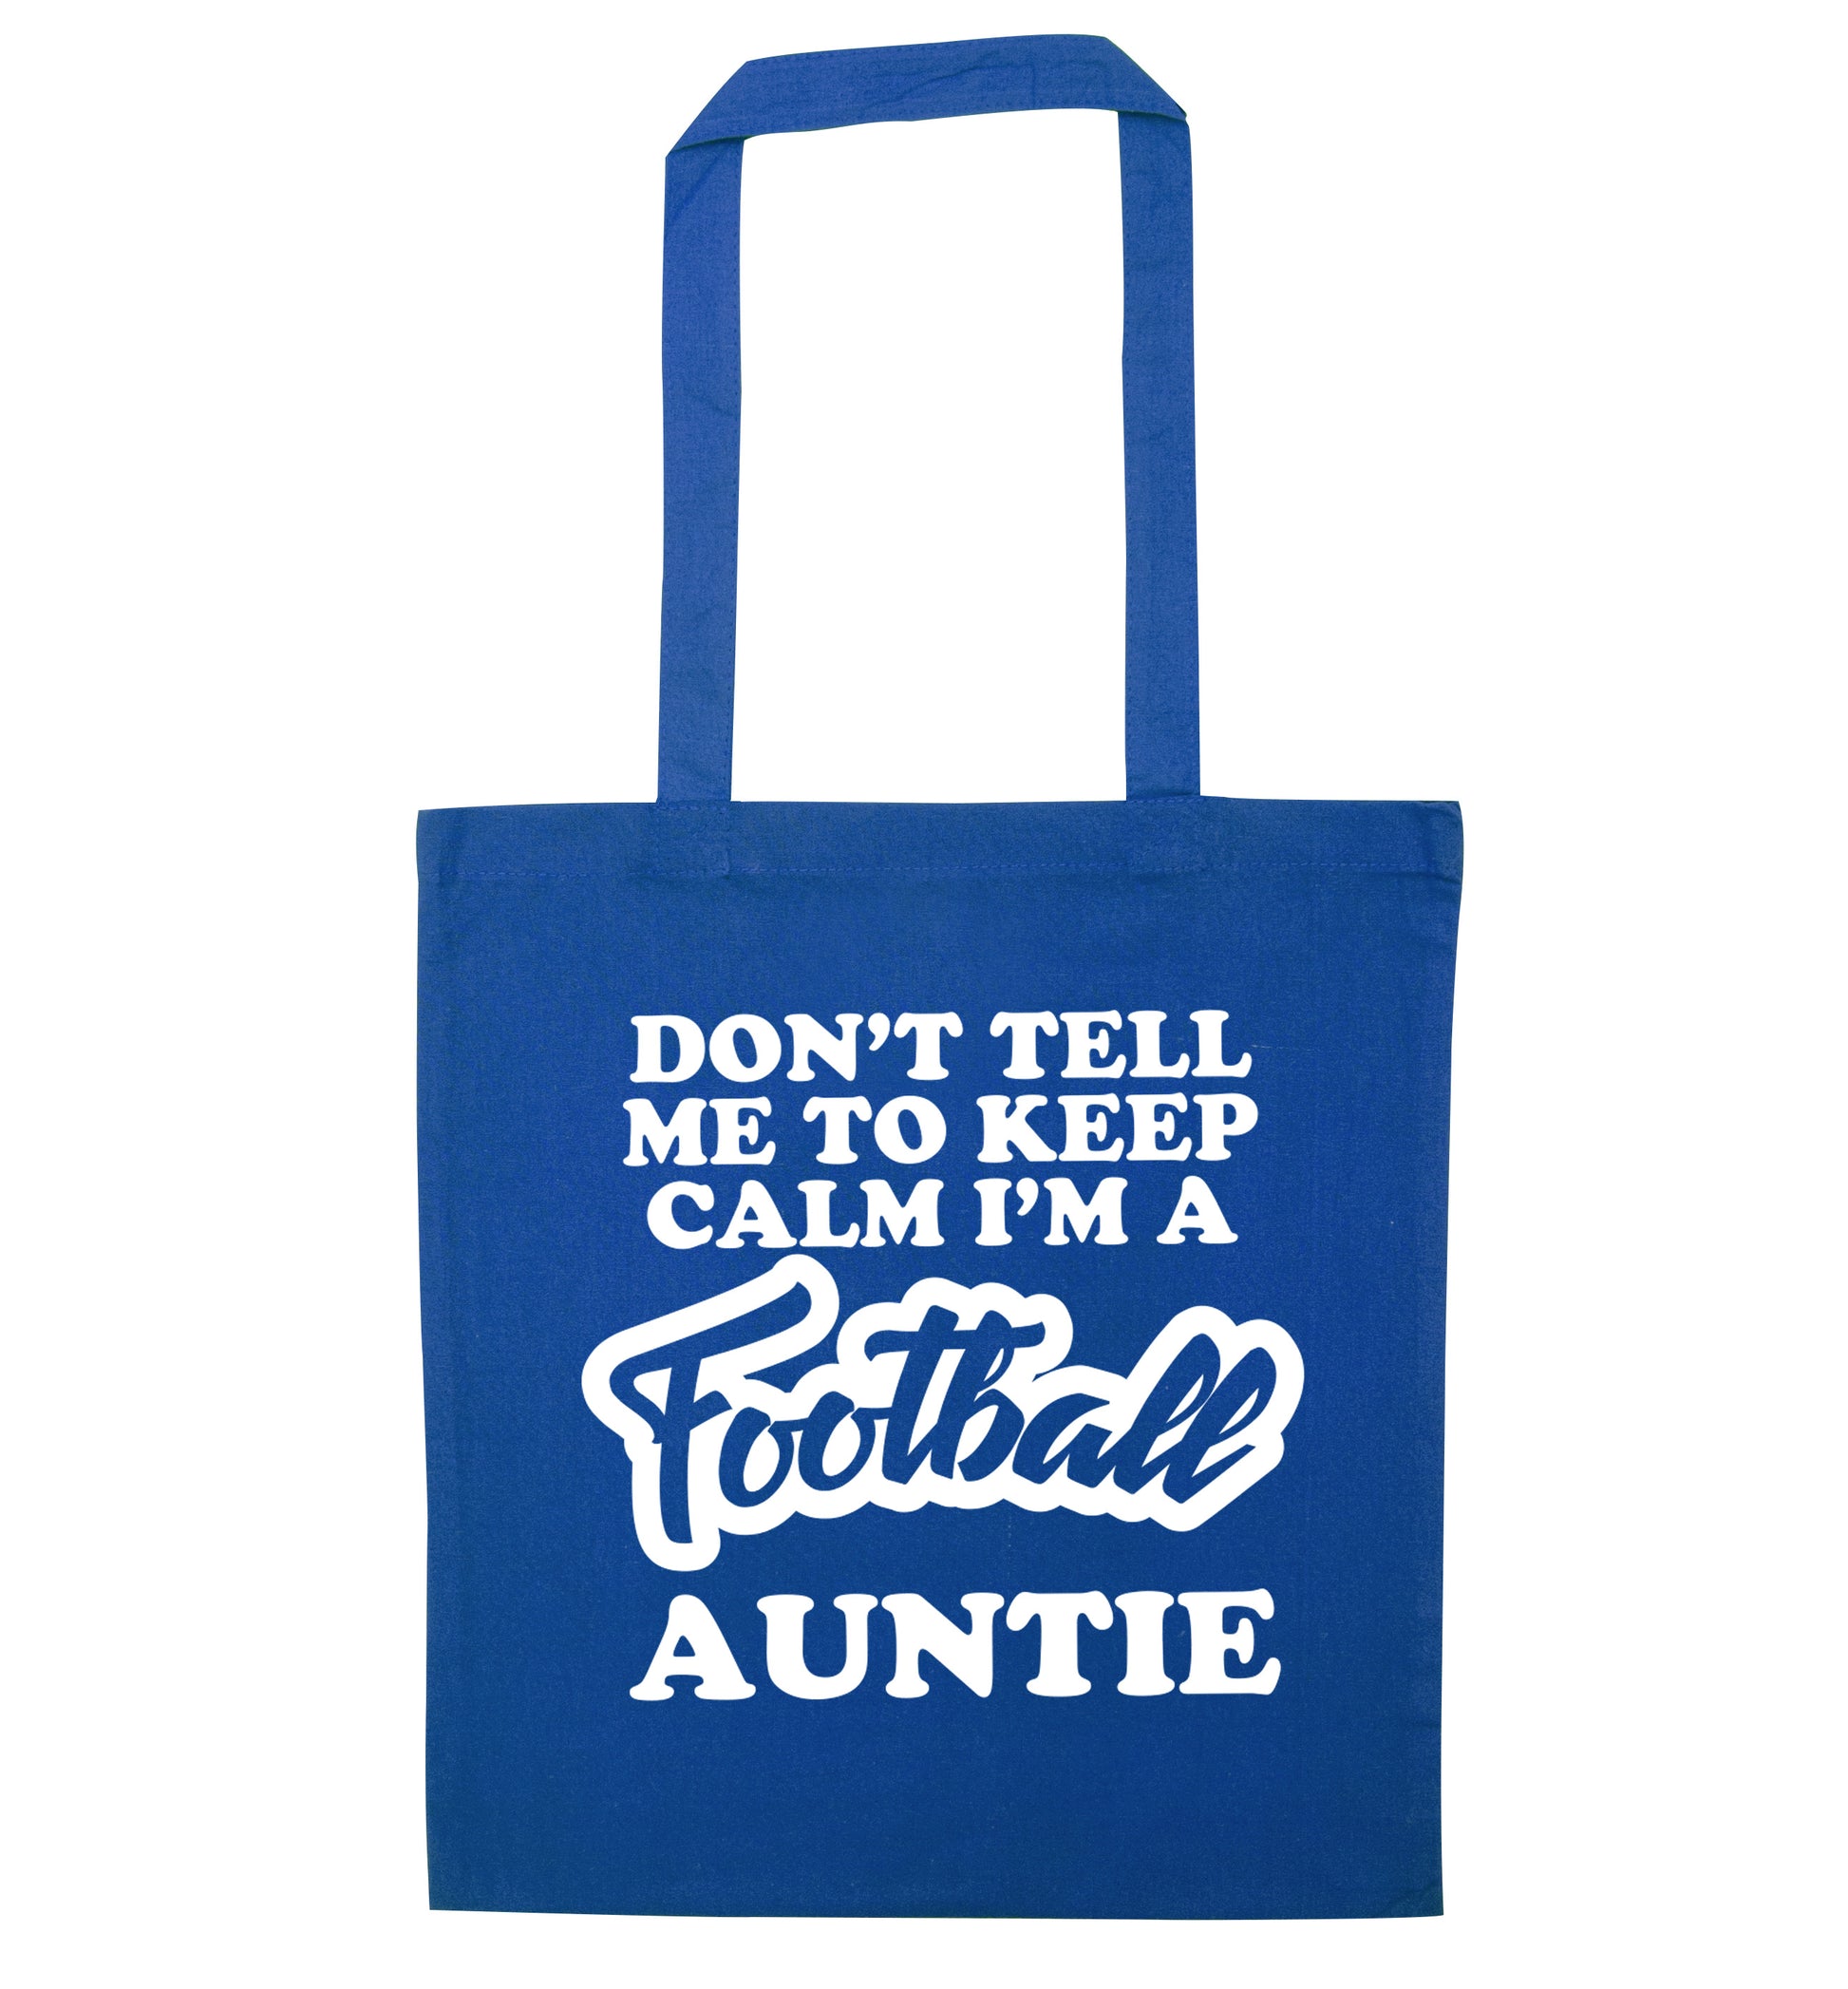 Don't tell me to keep calm I'm a football auntie blue tote bag